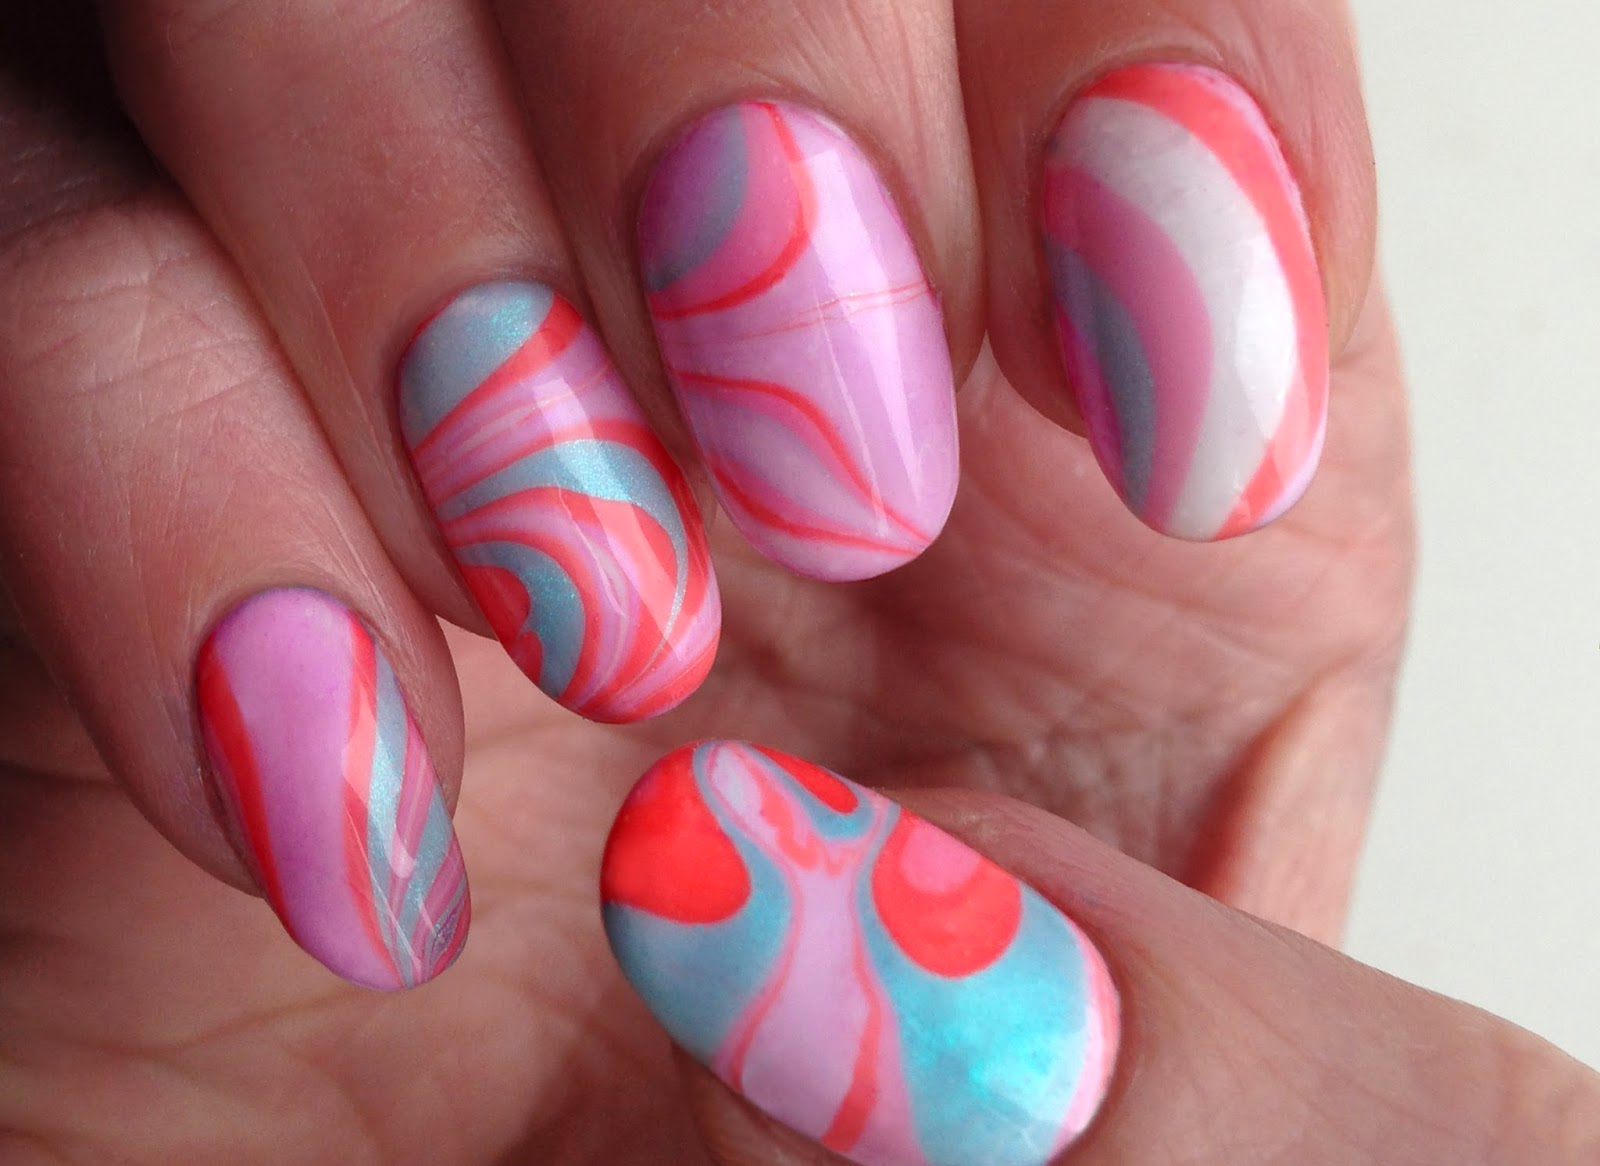 Water Marble Nail Art Designs for Short Nails - wide 3